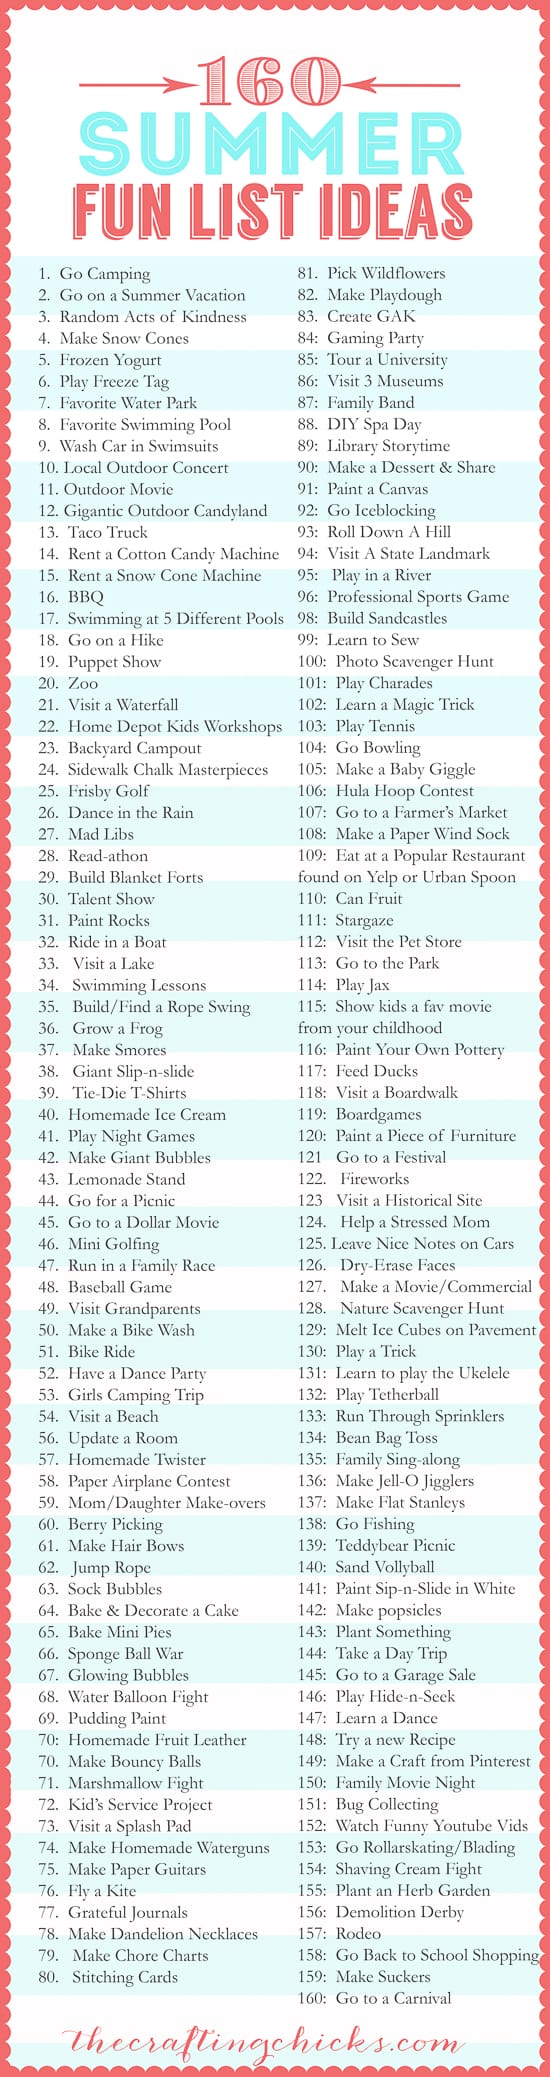 Summer Fun List of 160 ideas of activities to do with or without the kids this summer! Ideas range from FREE to just a little bit of spending money. Something for everyone on this list!